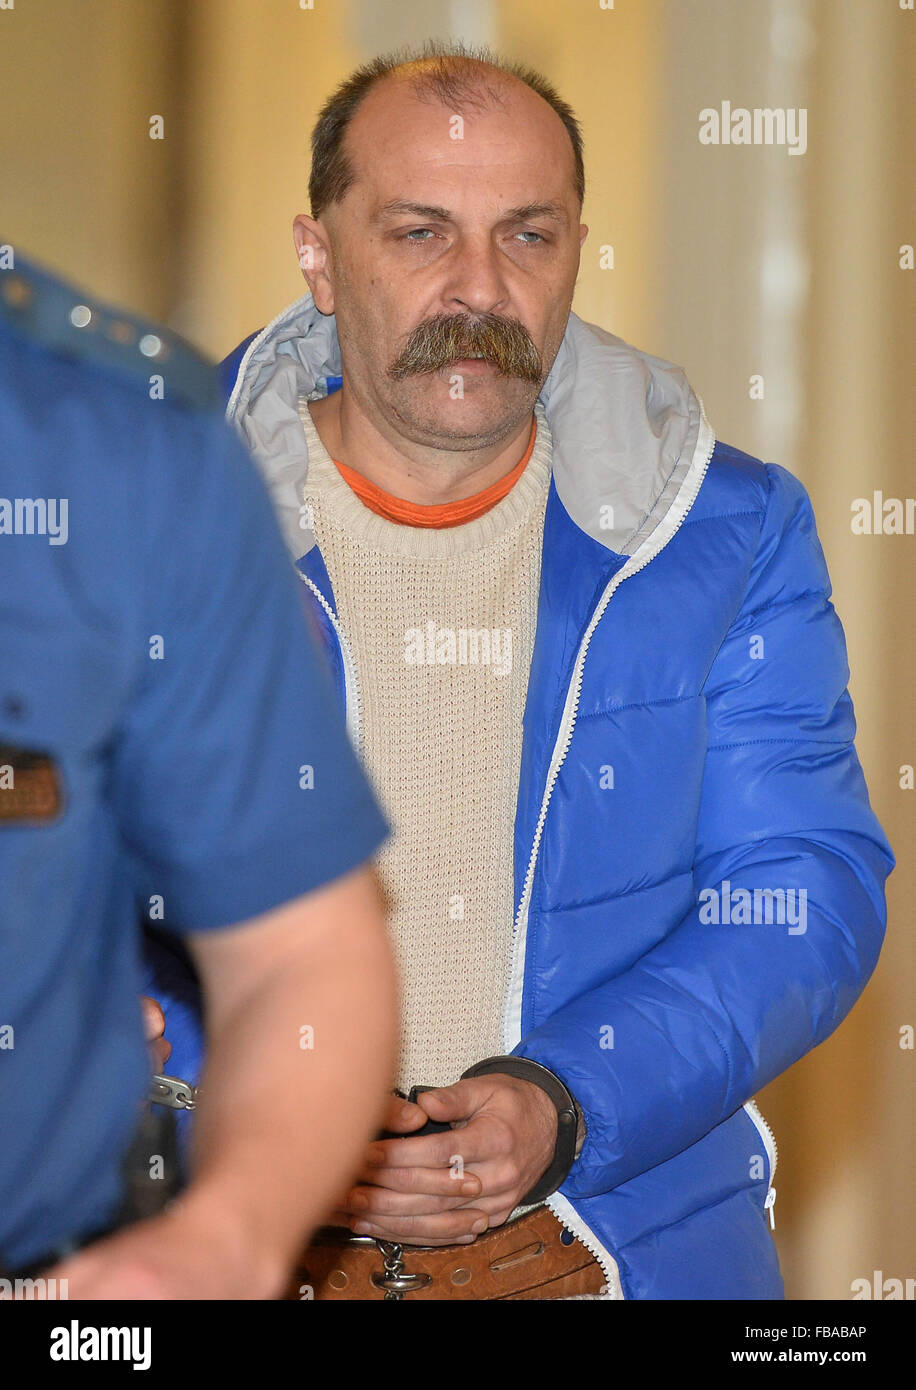 Court to deal with extradition of Petr Karlik (pictured), suspected of participation in illegal transport of migrants to Belgium took place in Prague, Czech Republic, January 13, 2016. The Prague Municipal Court approved the extradition of another Czech charged with people smuggling, Petr Karlik, to Belgium. On January 12, the court agreed with the extradition of Zdenek Grundza, who is suspected of masterminding the illegal transport of migrants from Albania, Syria, Macedonia and Kosovo to Britain in 2013-2015, as a member of an organised Czech-Albanian gang. Karlik allegedly worked as a drive Stock Photo